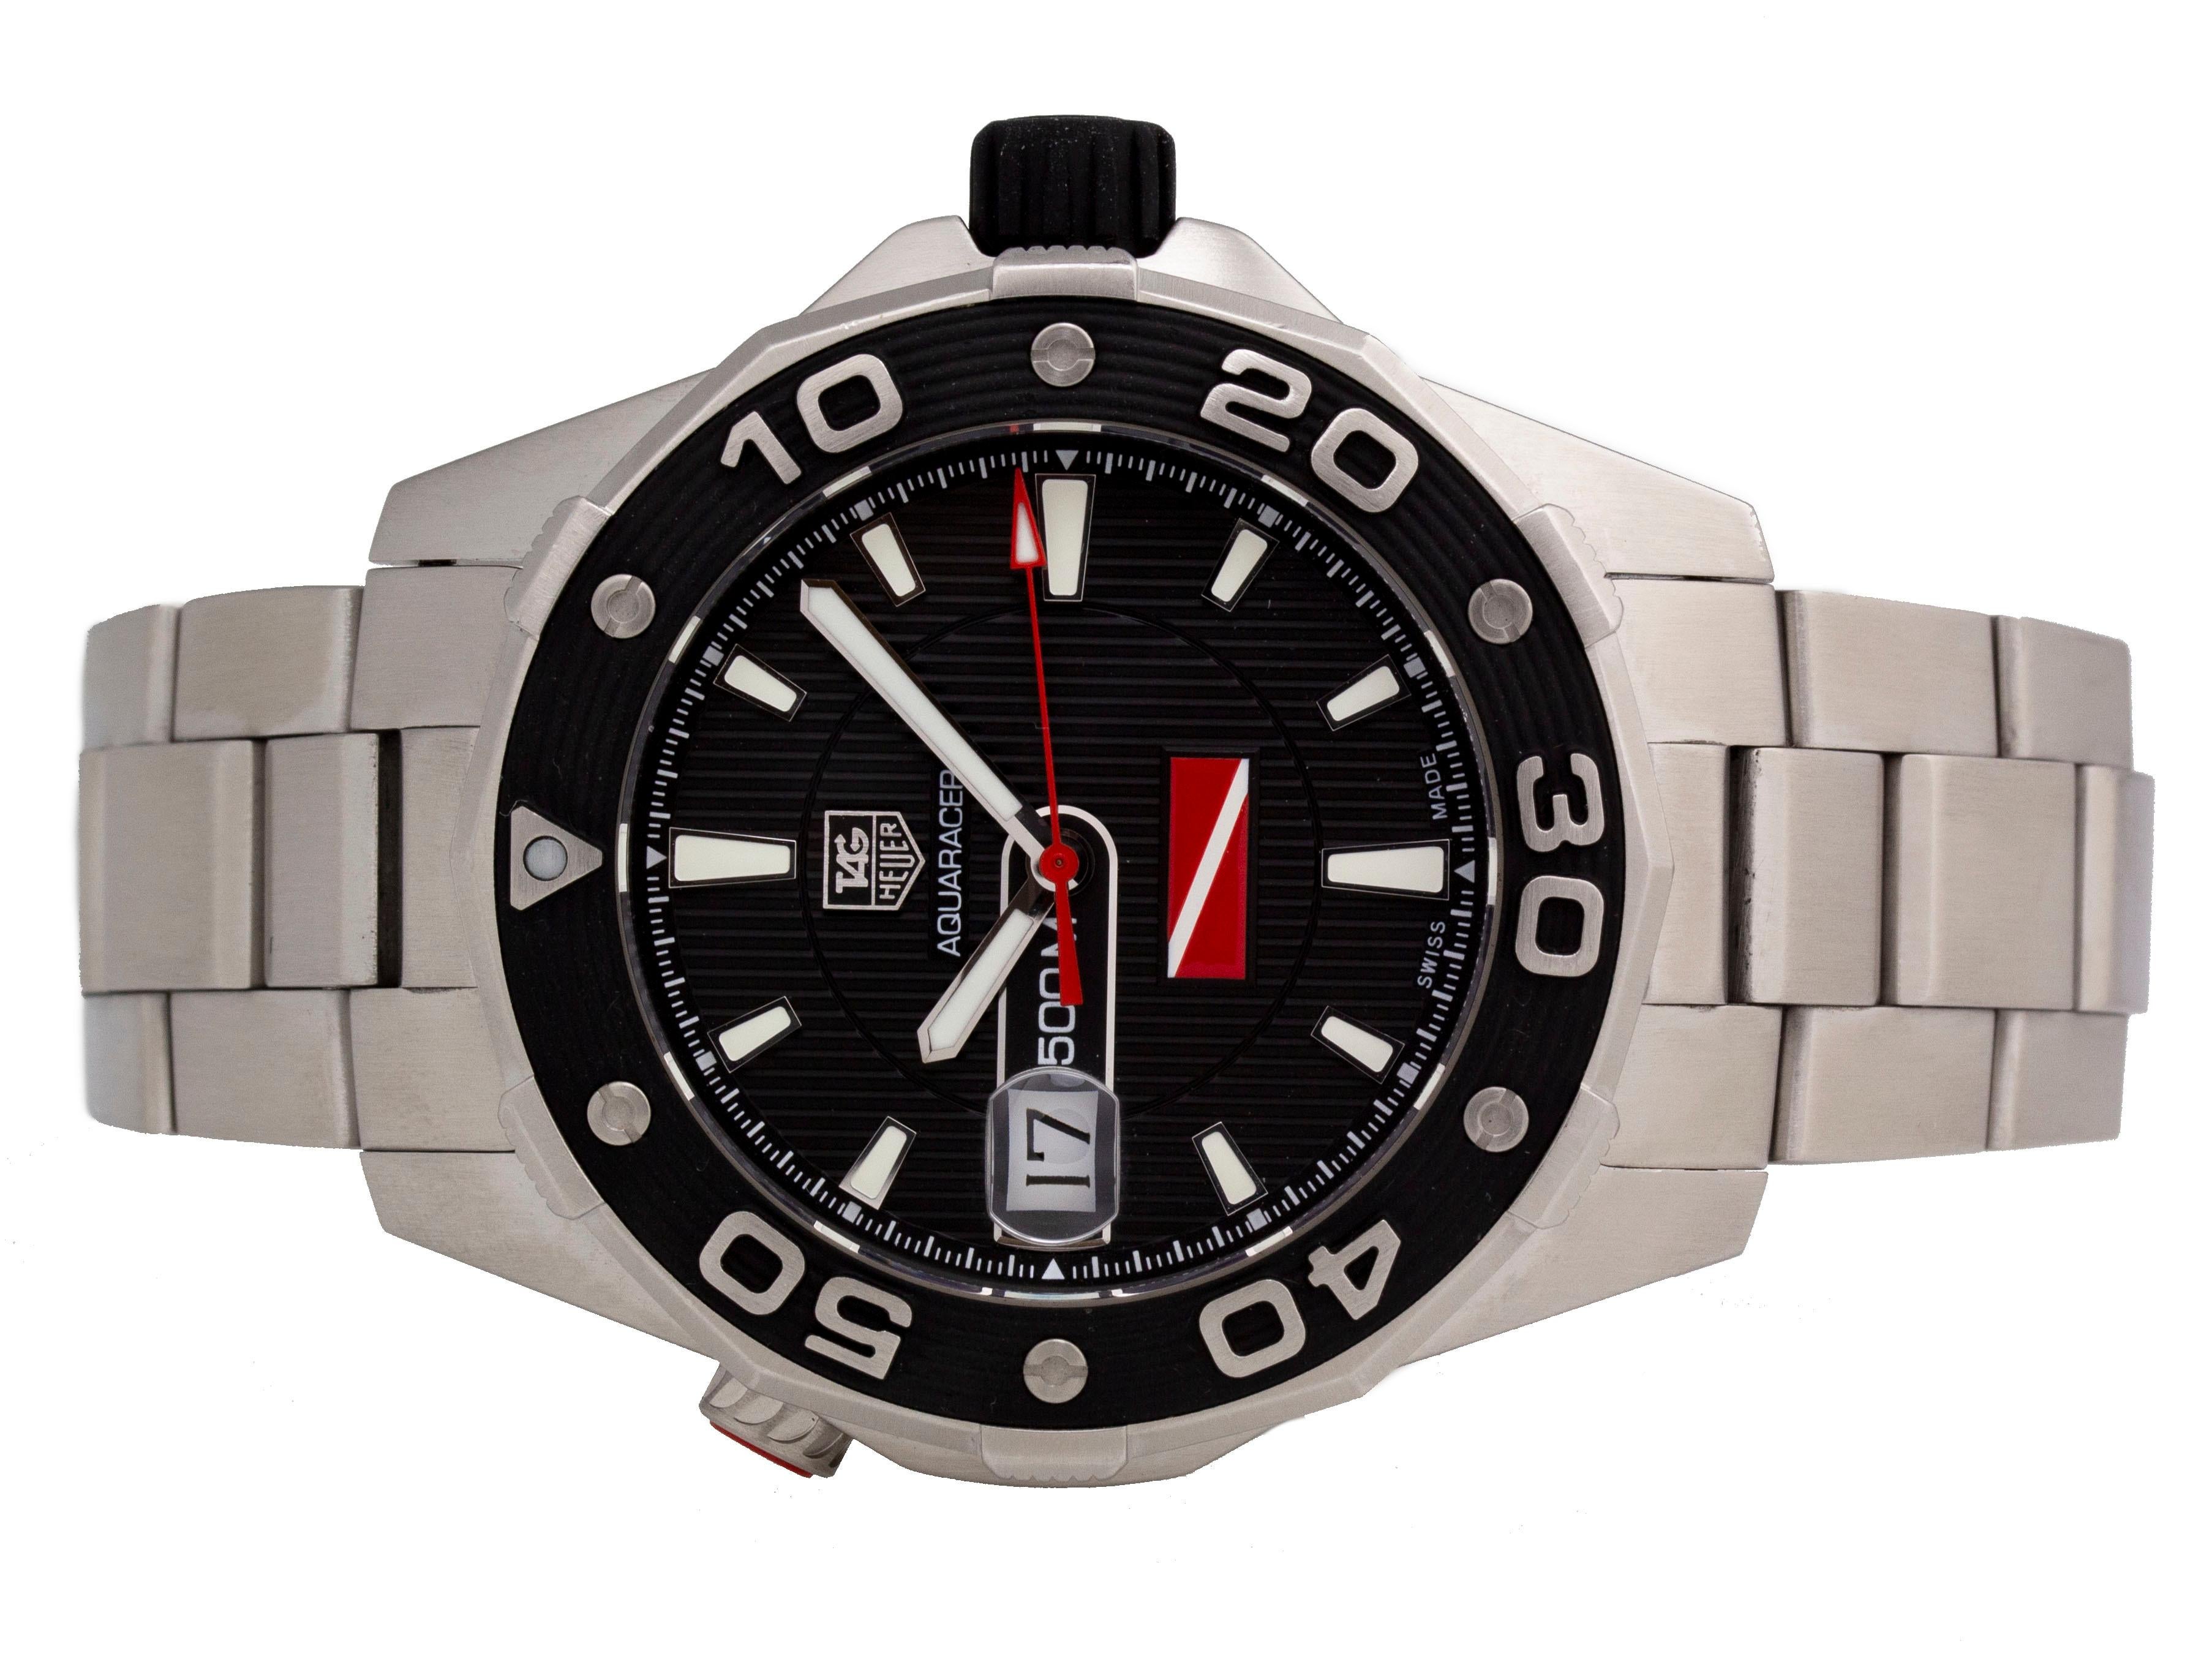 
Brand	Tag Heuer
Series	Aquaracer
Model	WAJ211A.BA0870
Gender	Men's
Condition	Great Pre-owned, Faint Dings & Scratches on Case & Bezel
Material	Stainless Steel
Finish	Brushed
Caseback	Solid
Diameter	43mm
Thickness	 
Bezel	Stainless Steel w/ Rubber